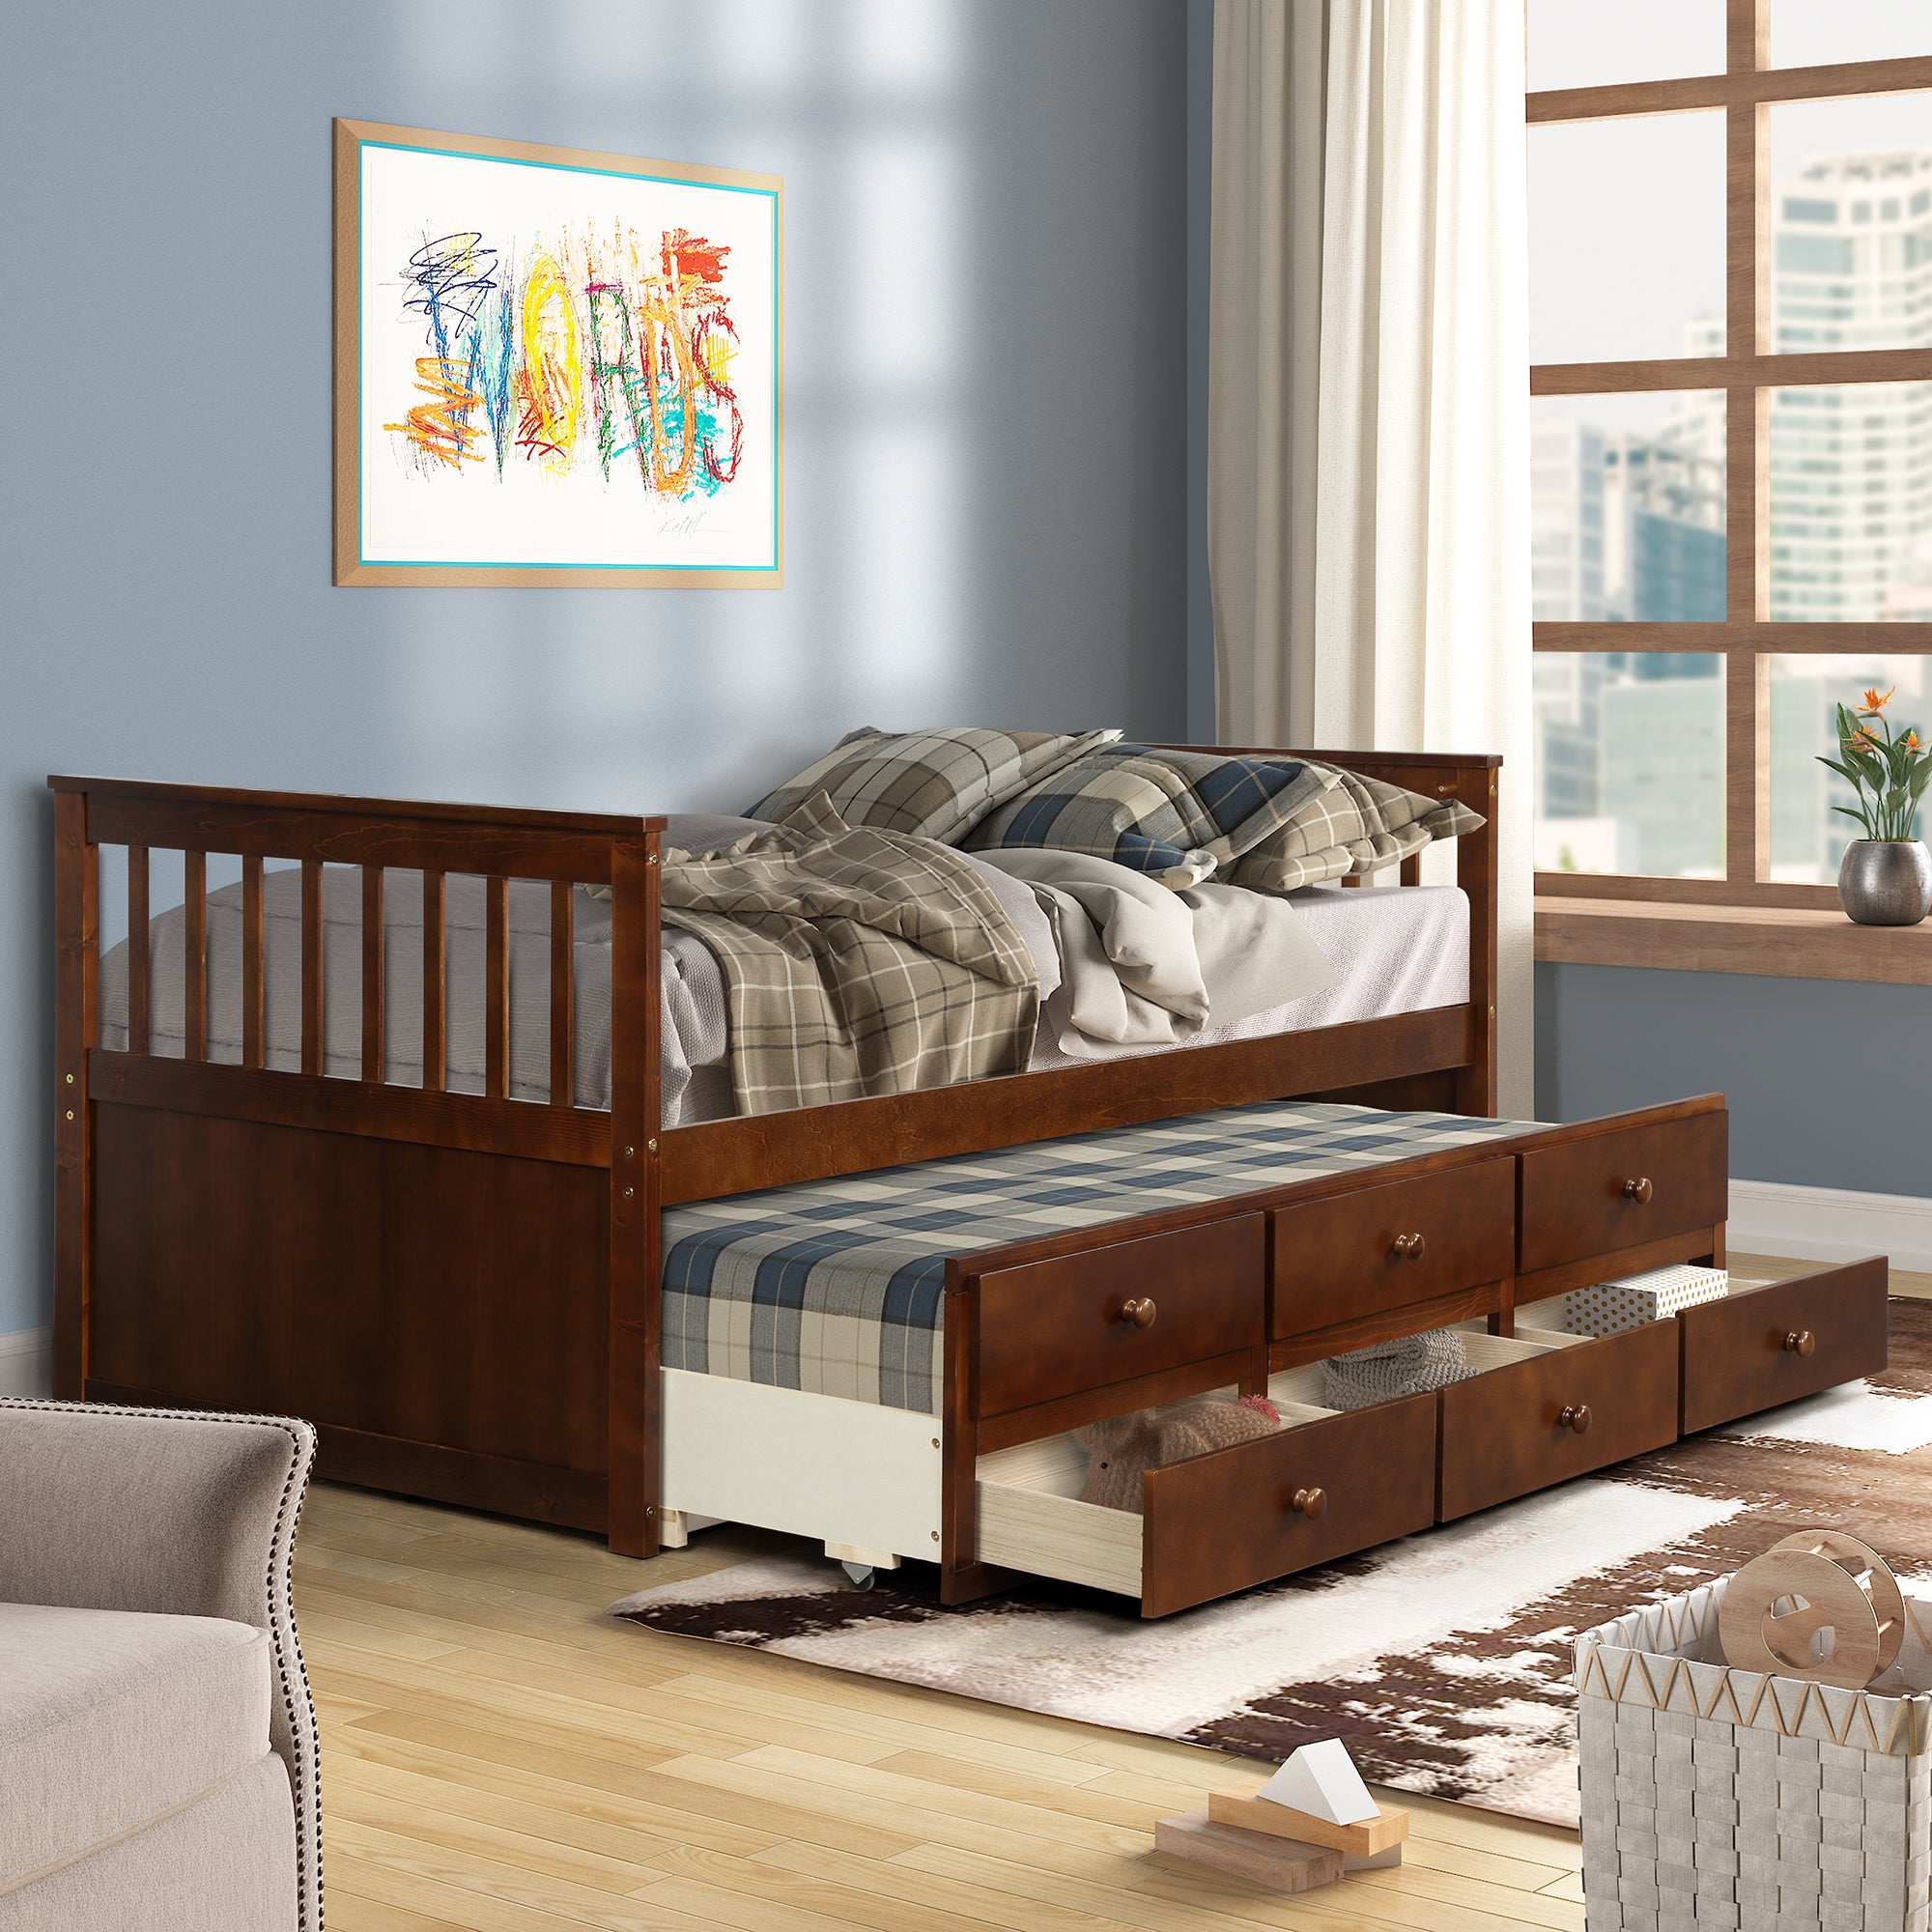 Walnut Captain's Bed Twin Daybed with Trundle Bed and Storage Drawers